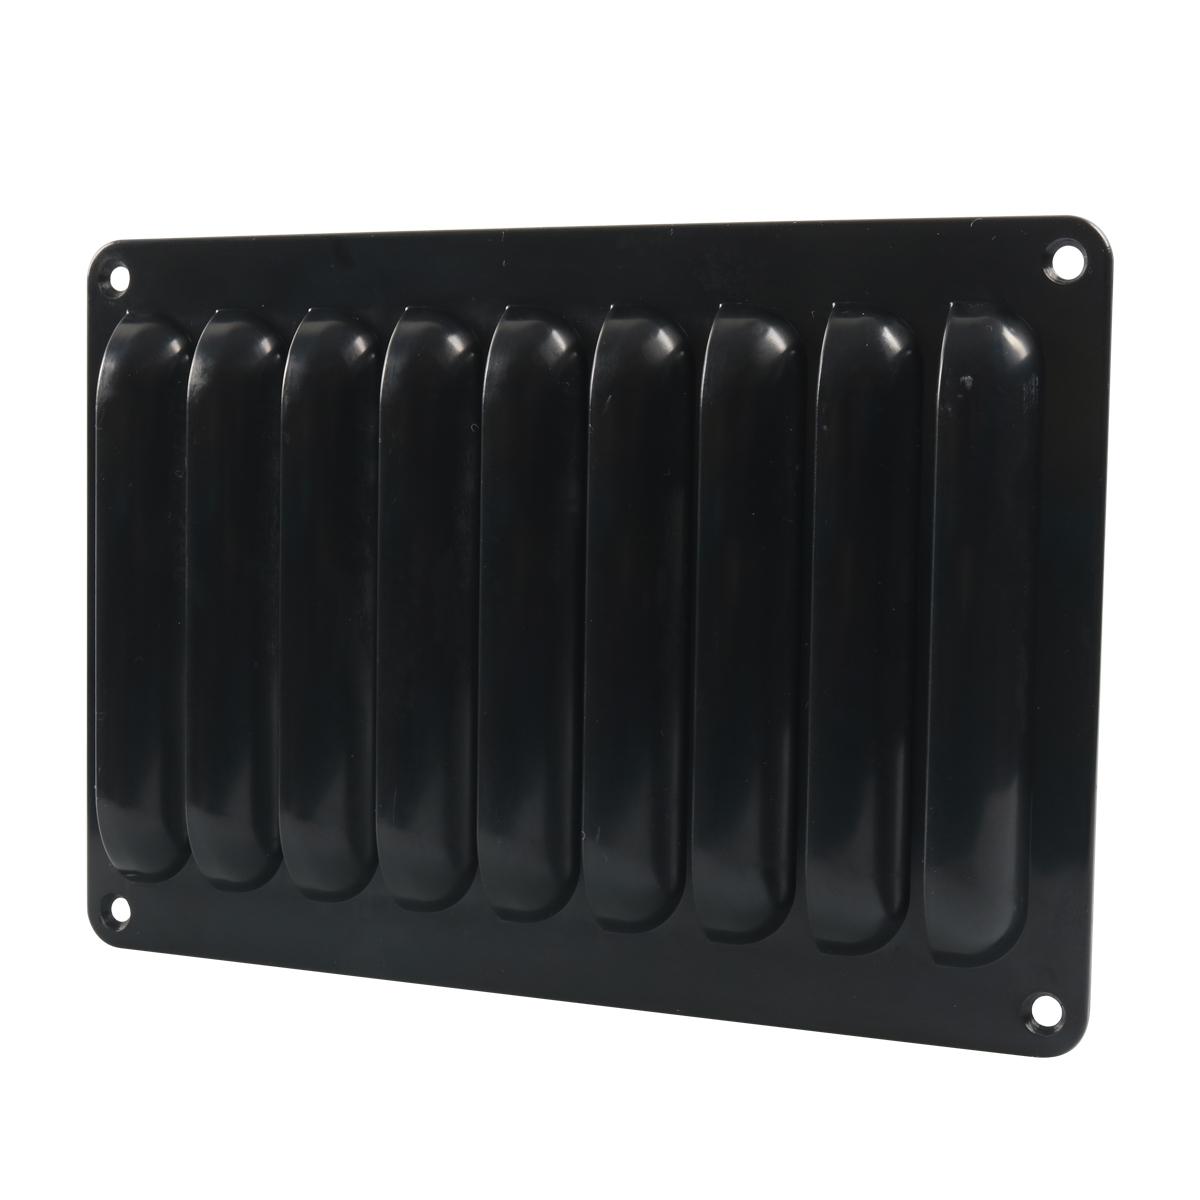 A6786 214x149mm RV / Bus Grille Vent Panel with Screws(Black)